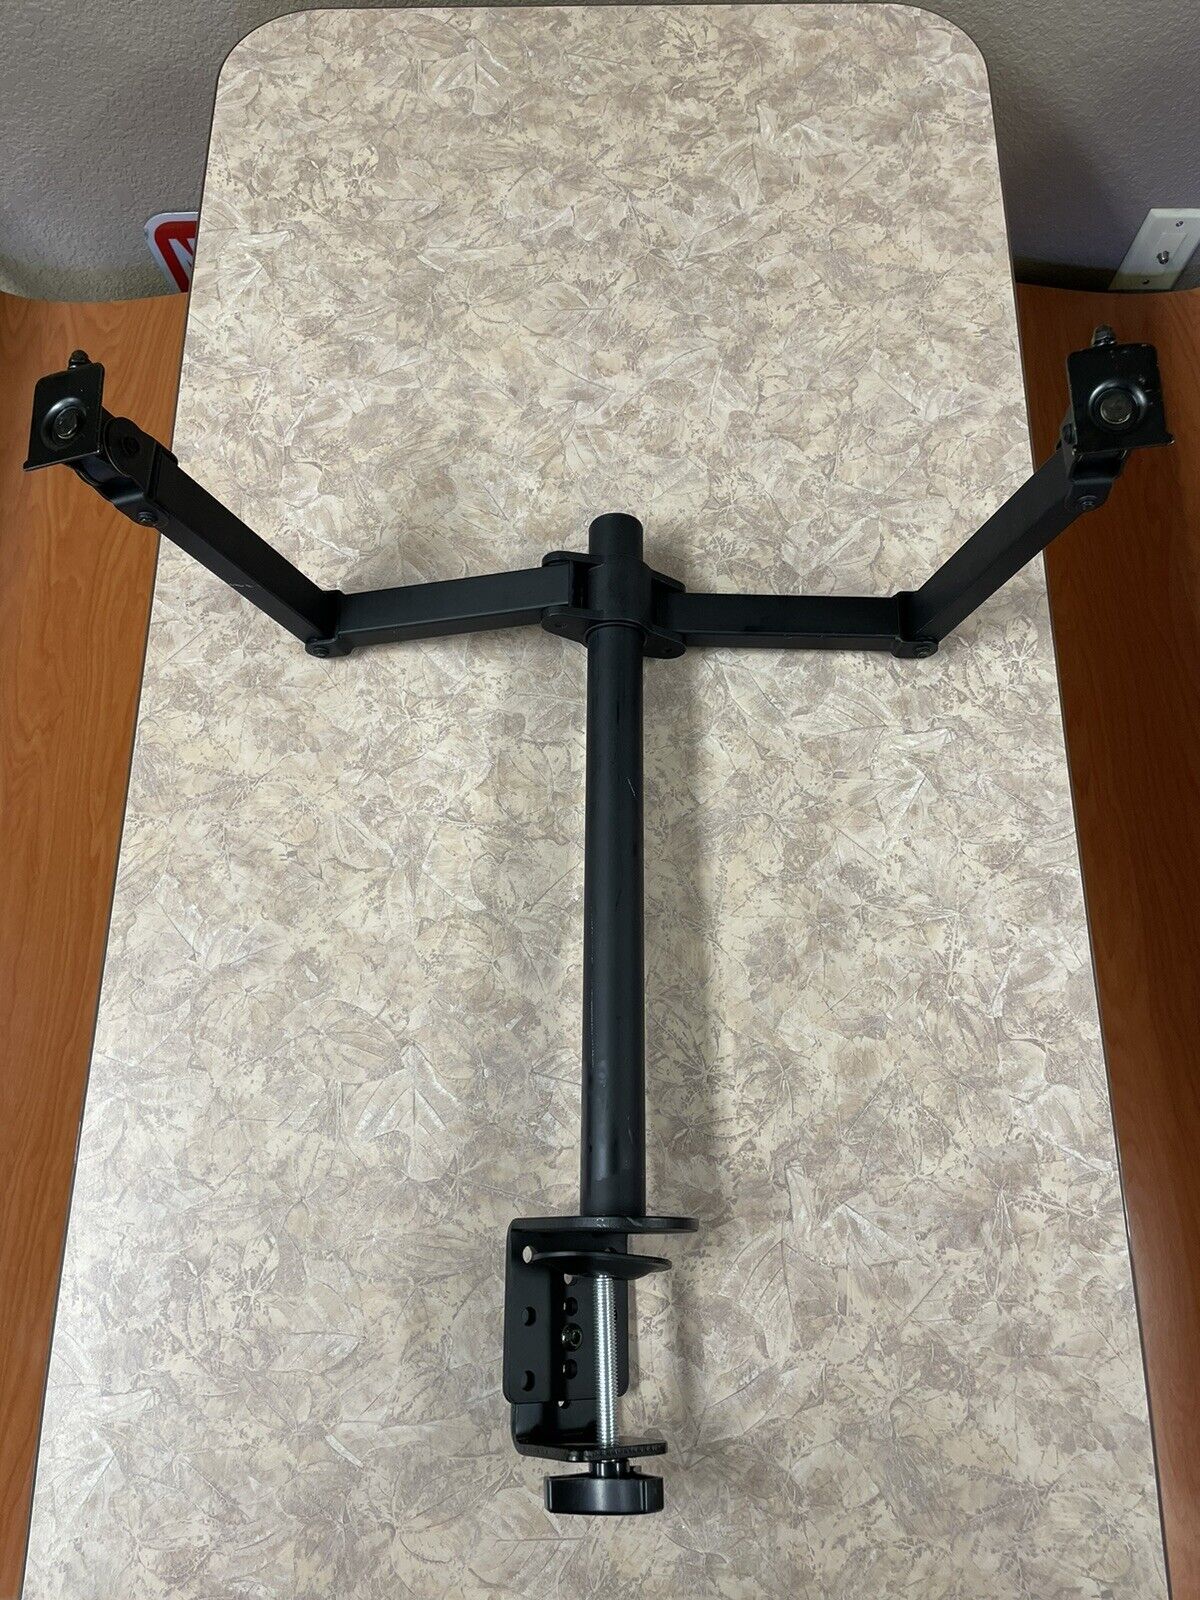 VIVO Dual Monitor Stand Arm VESA Desk Mount for Gaming/Office Computer Double